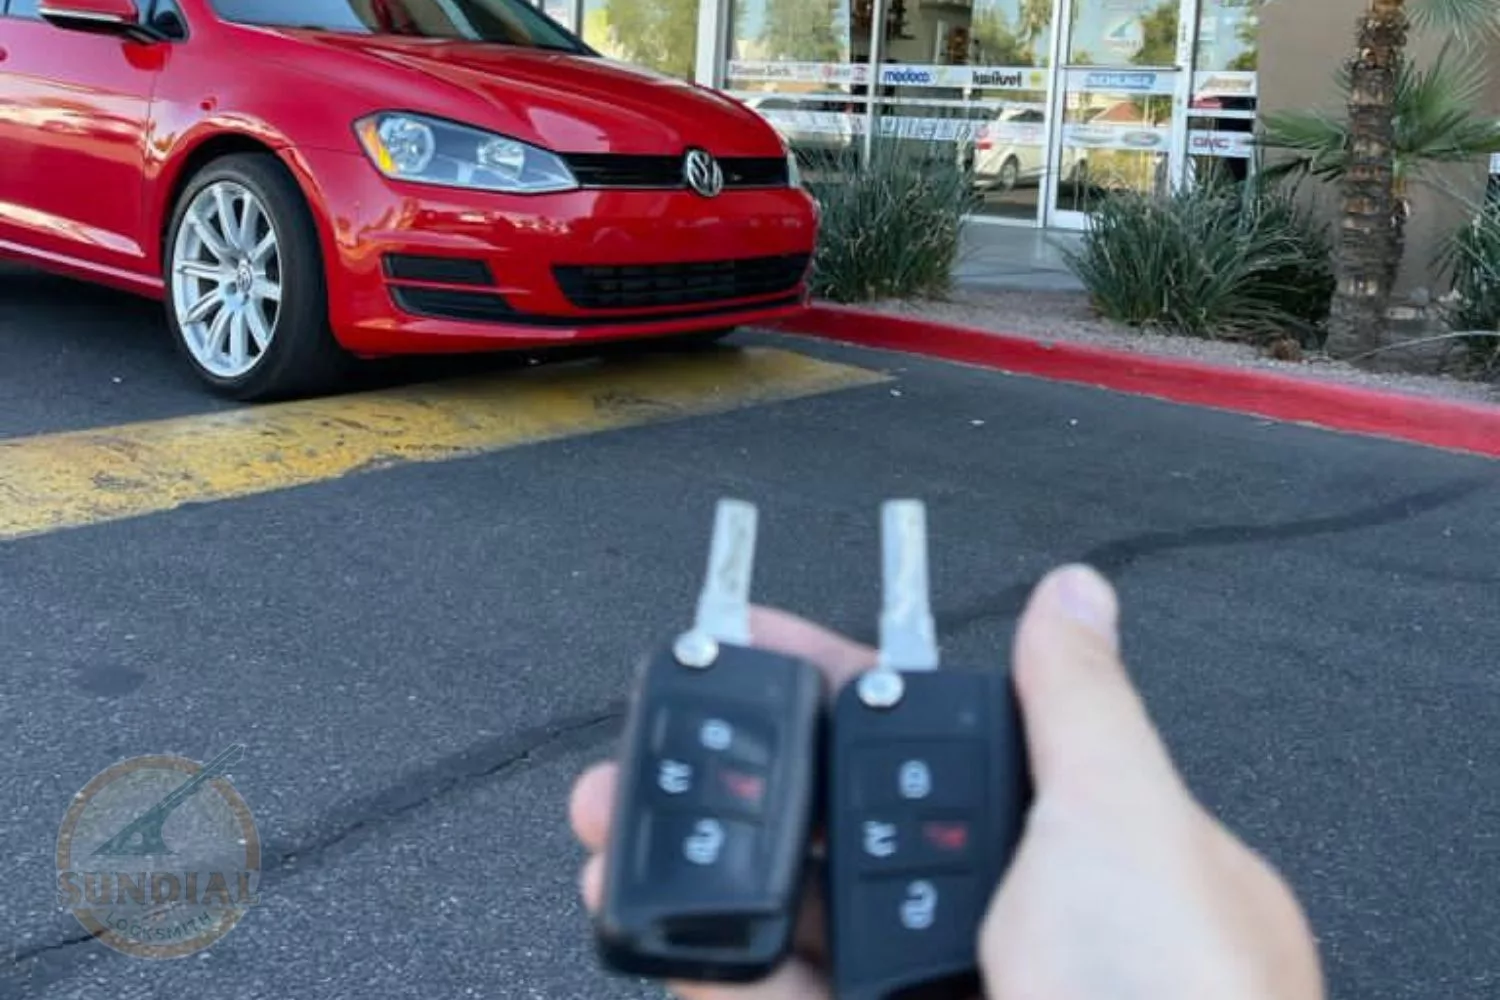 A hand holding two Volkswagen key fobs in front of a red Volkswagen Golf parked outside a locksmith shop.